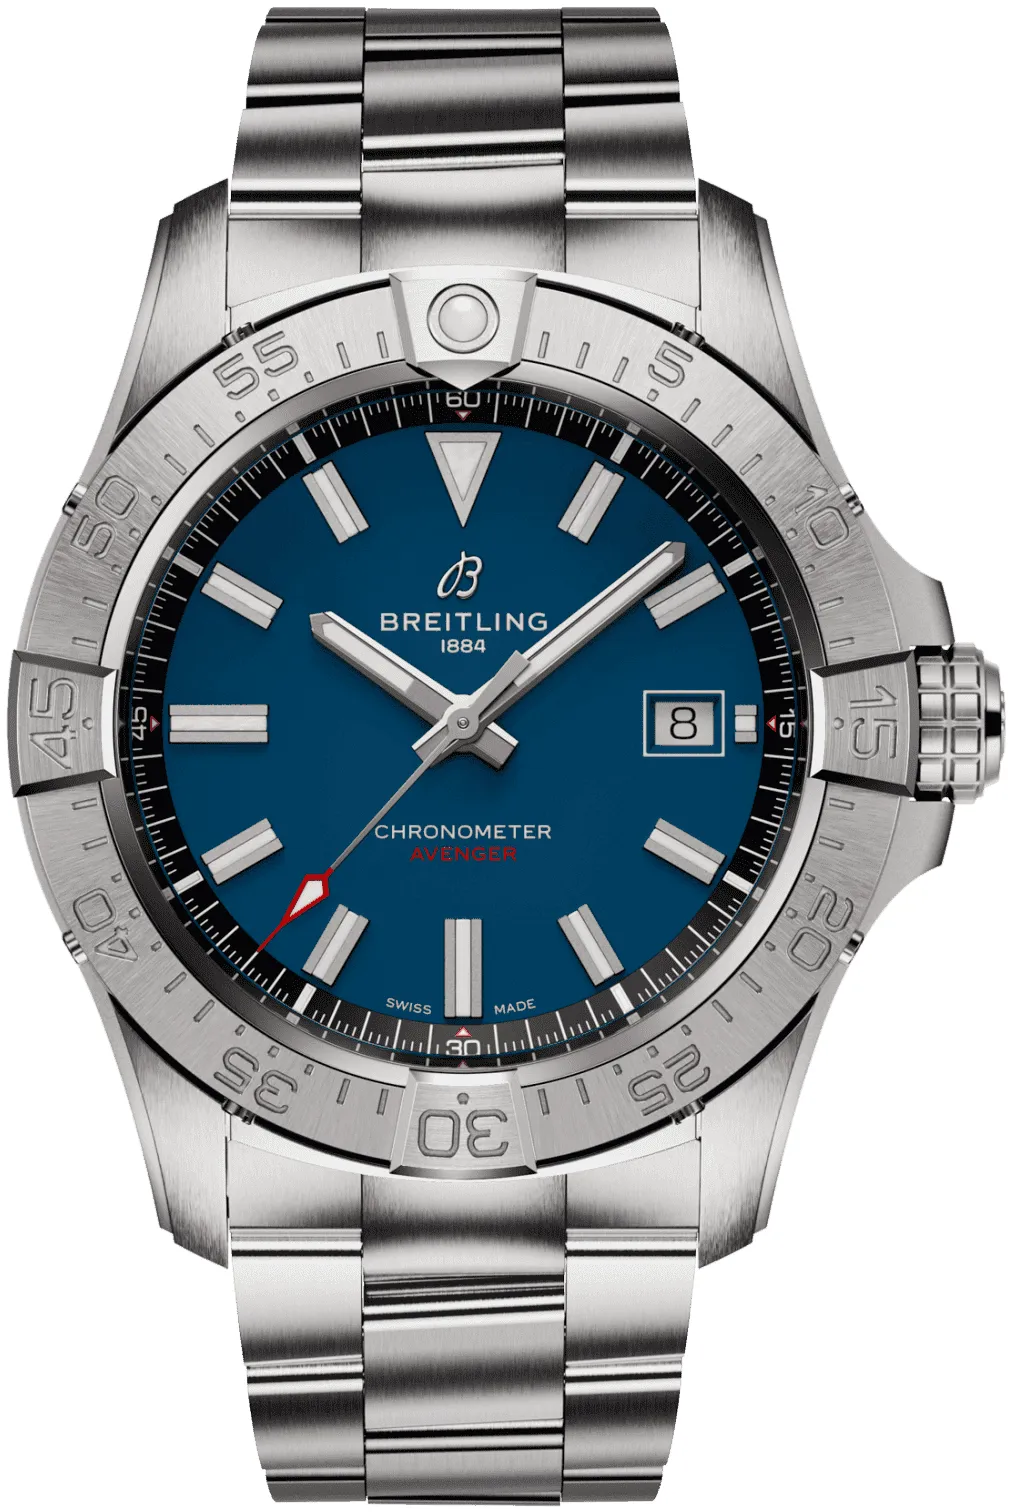 Breitling Avenger A17328101C1A1 42mm Stainless steel Blue